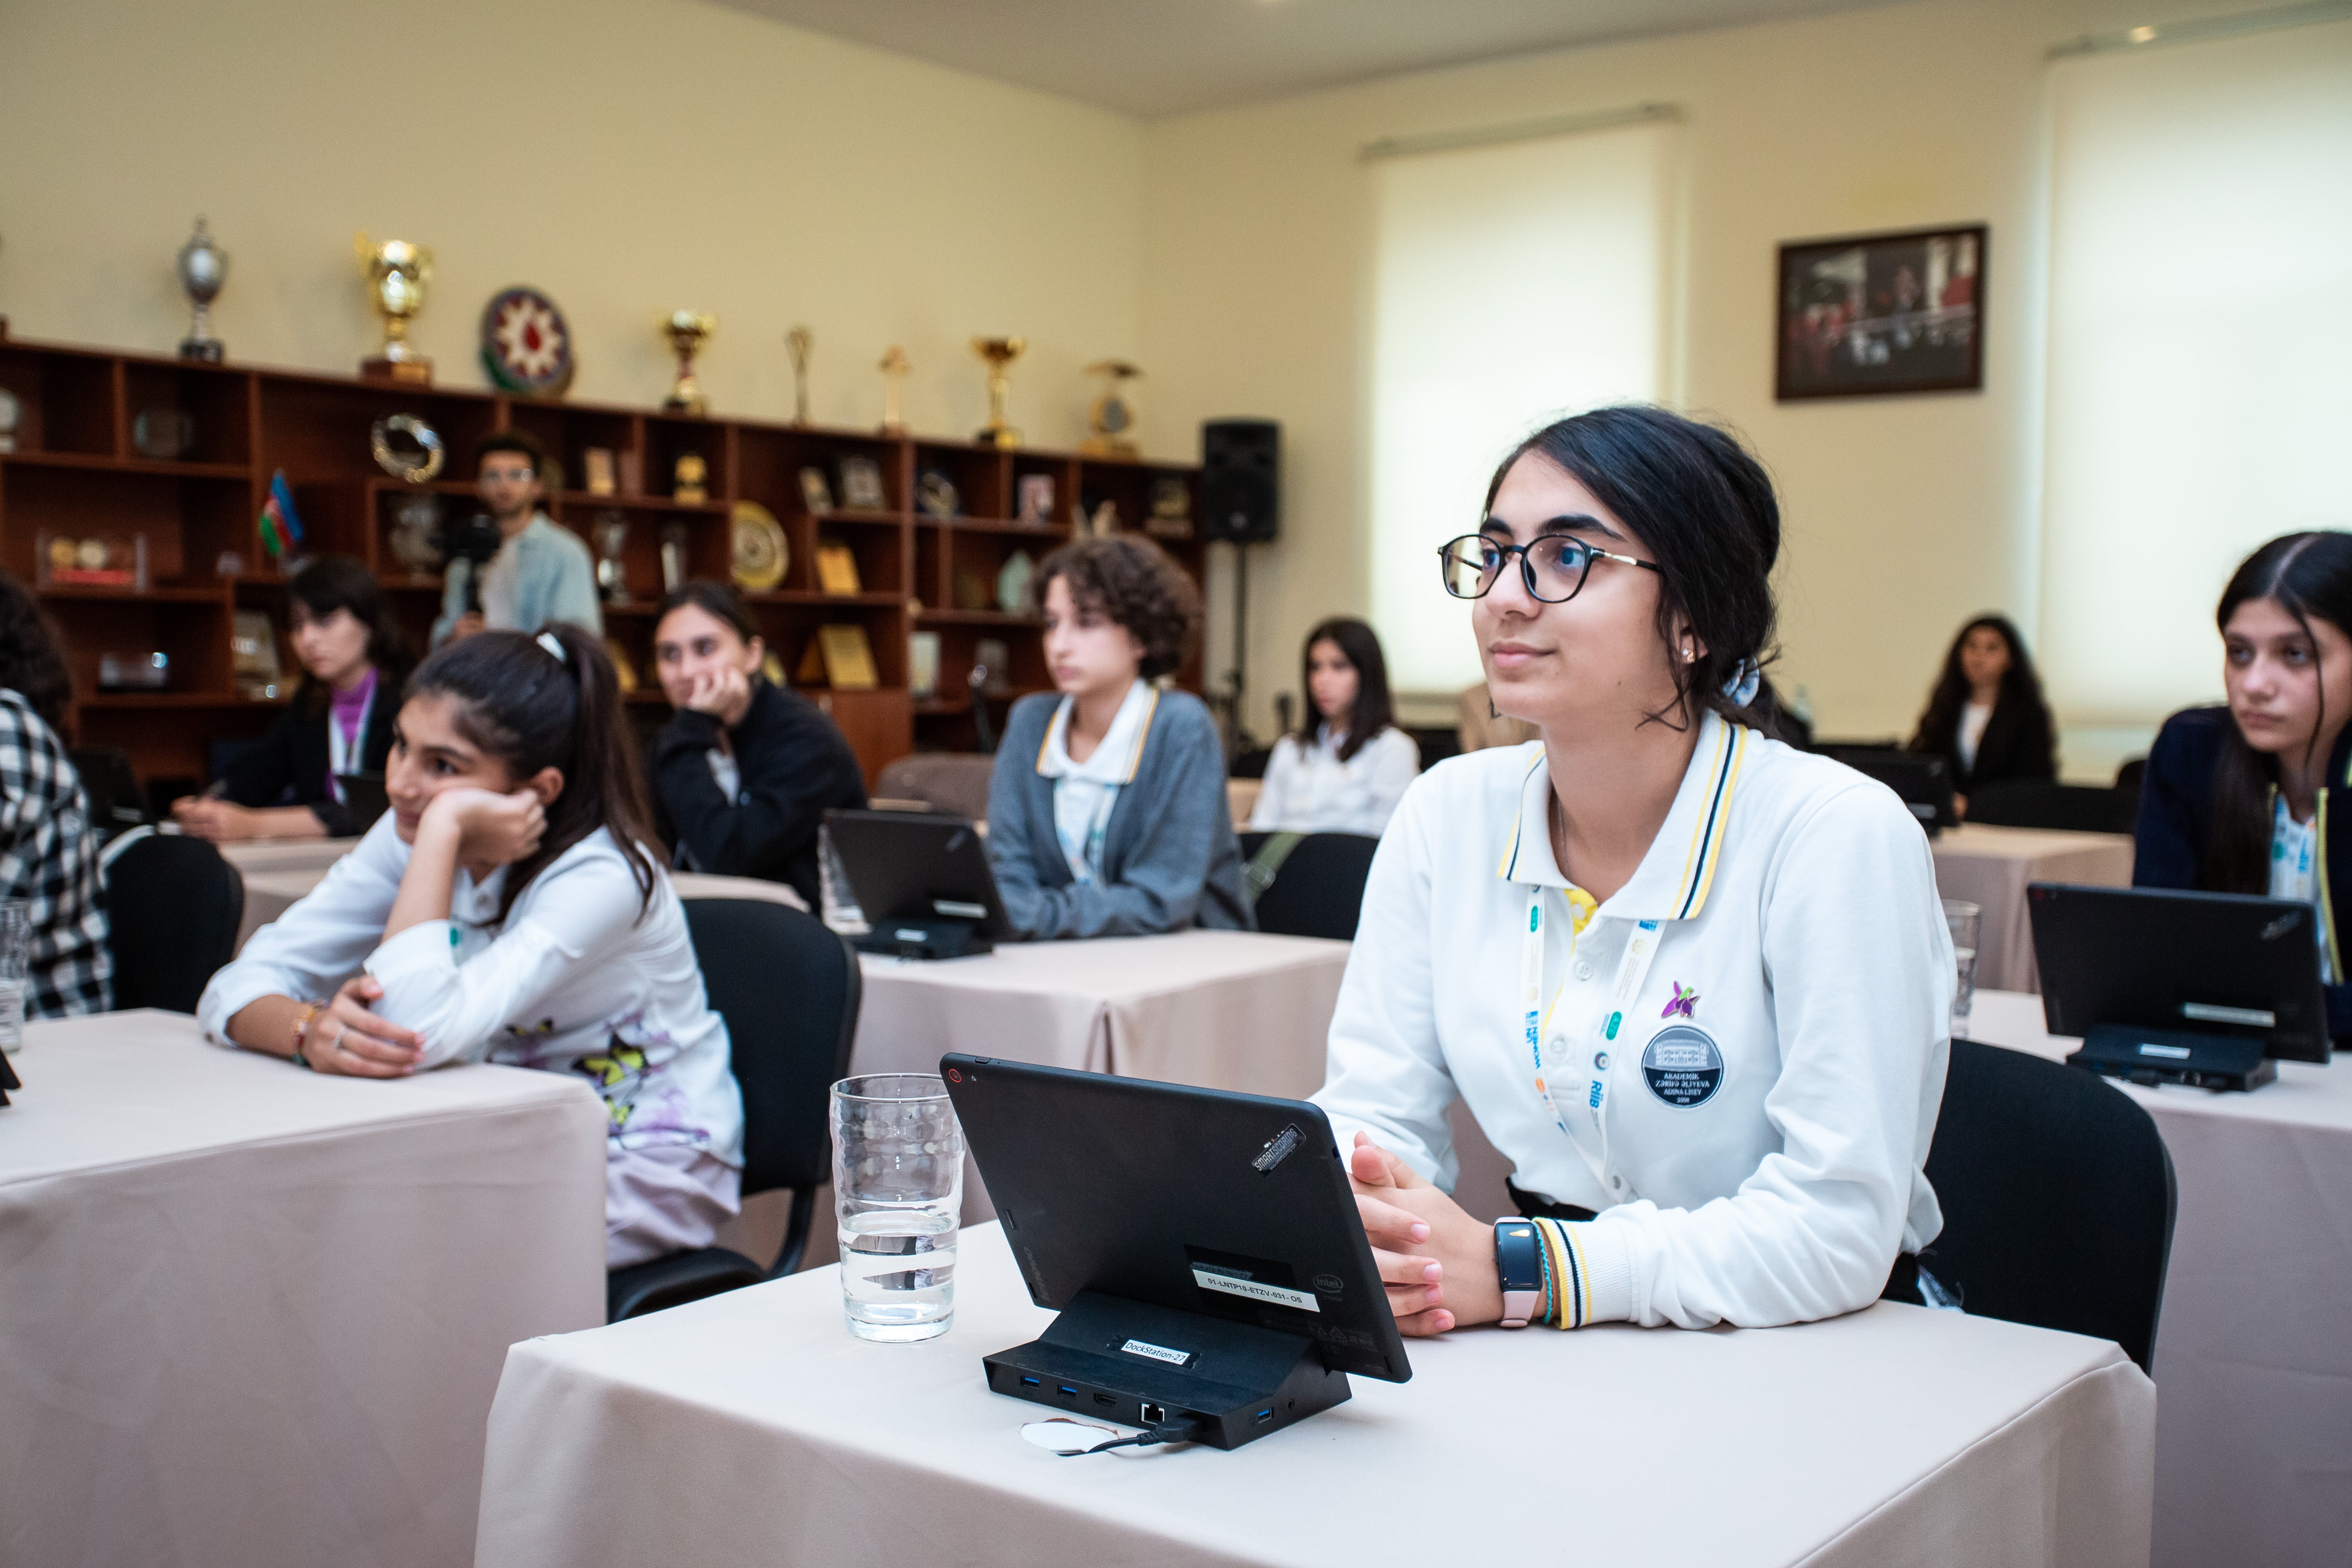 In Azerbaijan, girls are empowered to raise their voices as decision makers, paving the way for greater economic opportunities and gender equality in the future. Photo: UNFPA Azerbaijan, 2022.